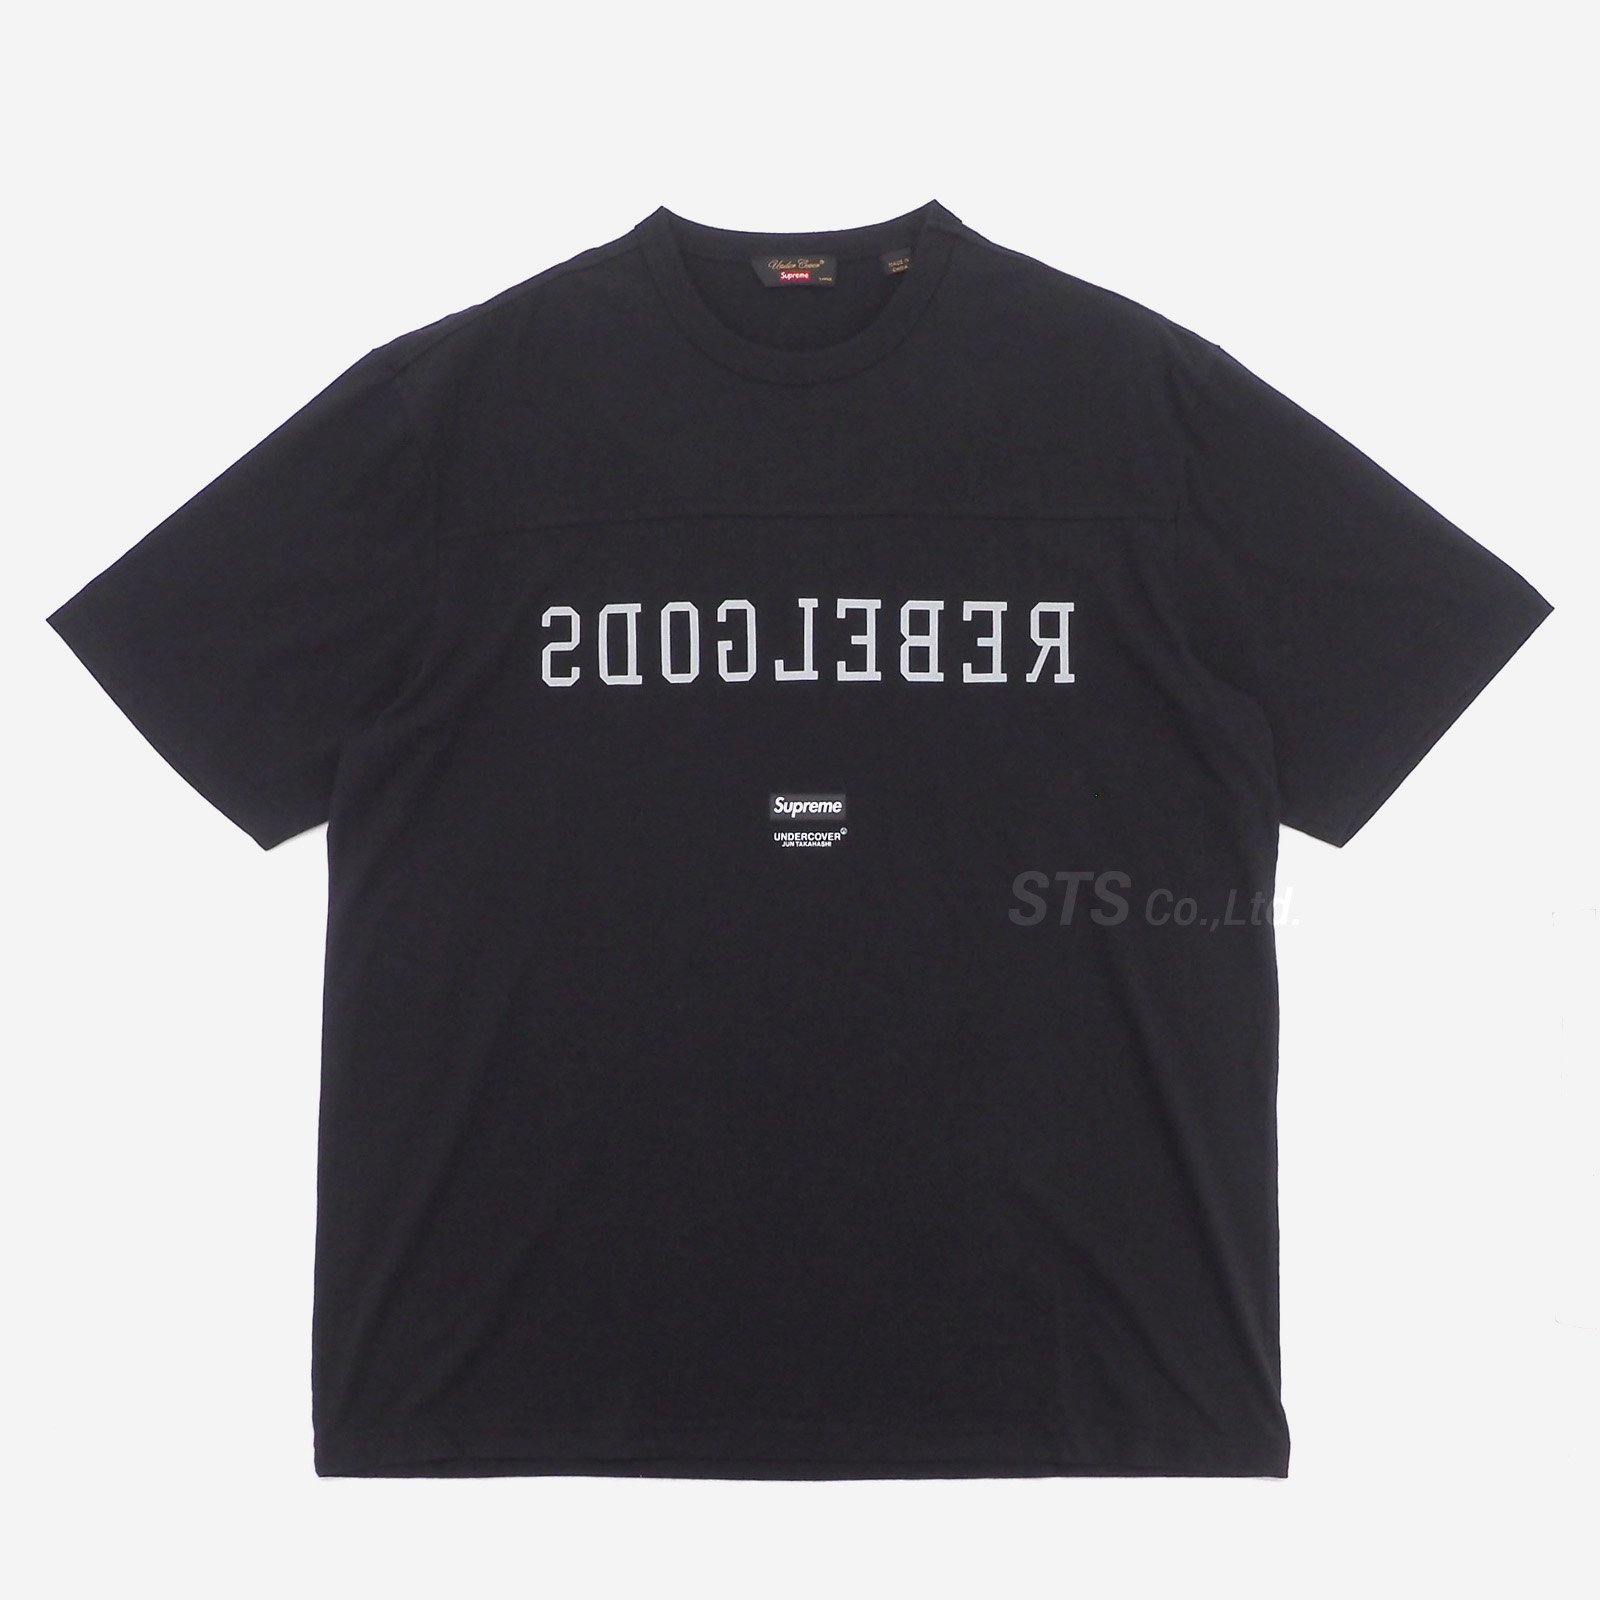 Supreme/UNDERCOVER Football Top - ParkSIDER